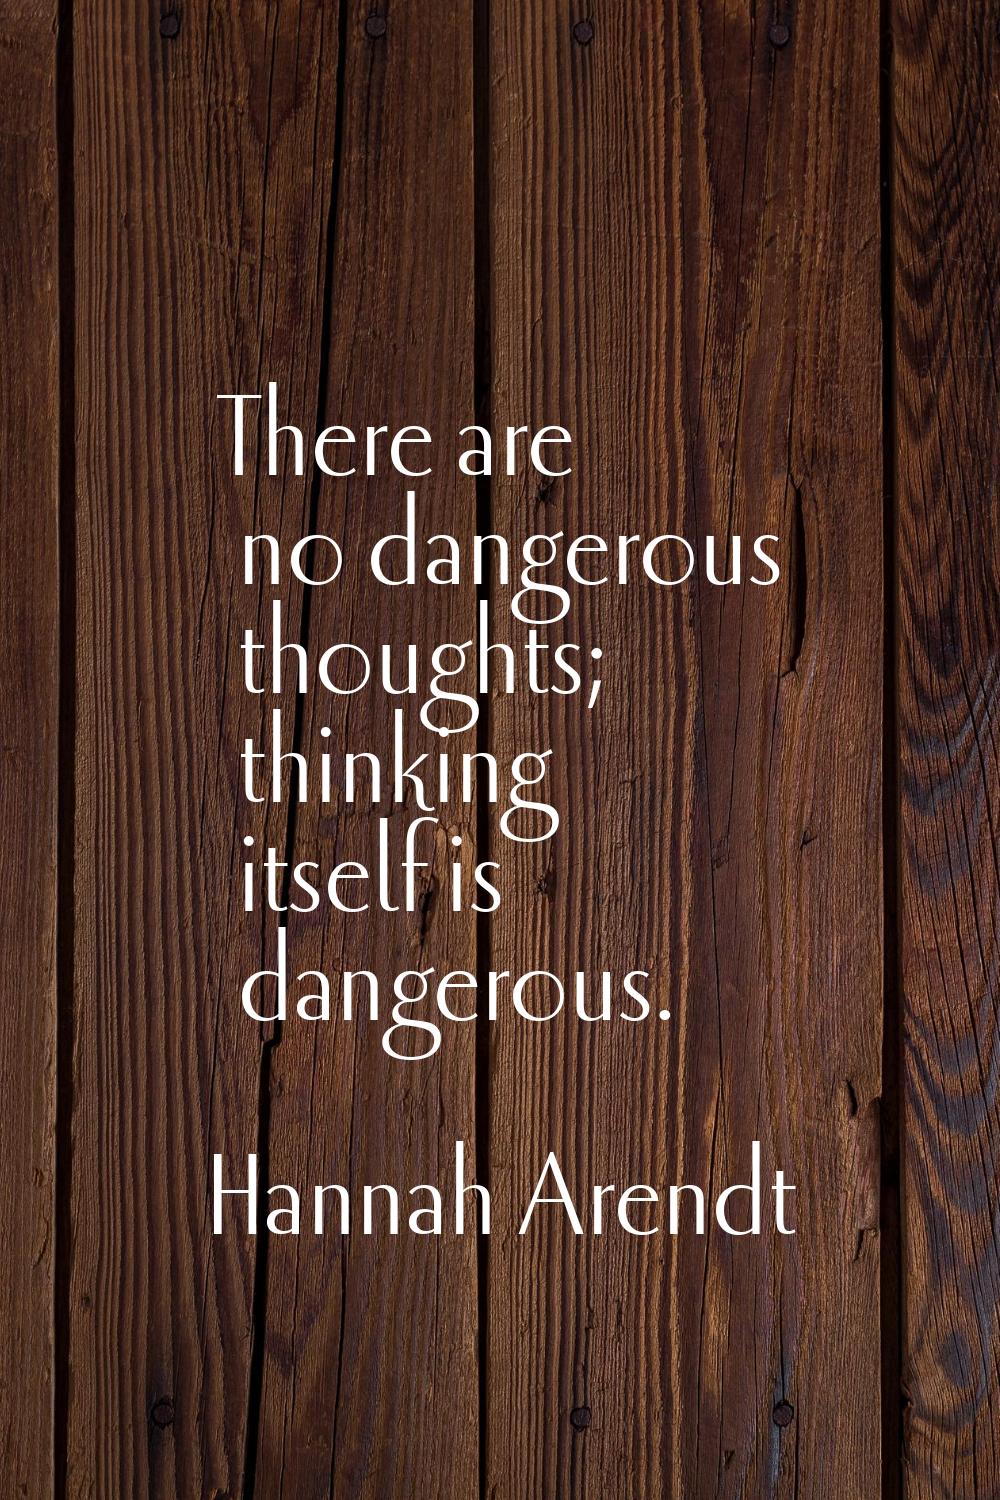 There are no dangerous thoughts; thinking itself is dangerous.